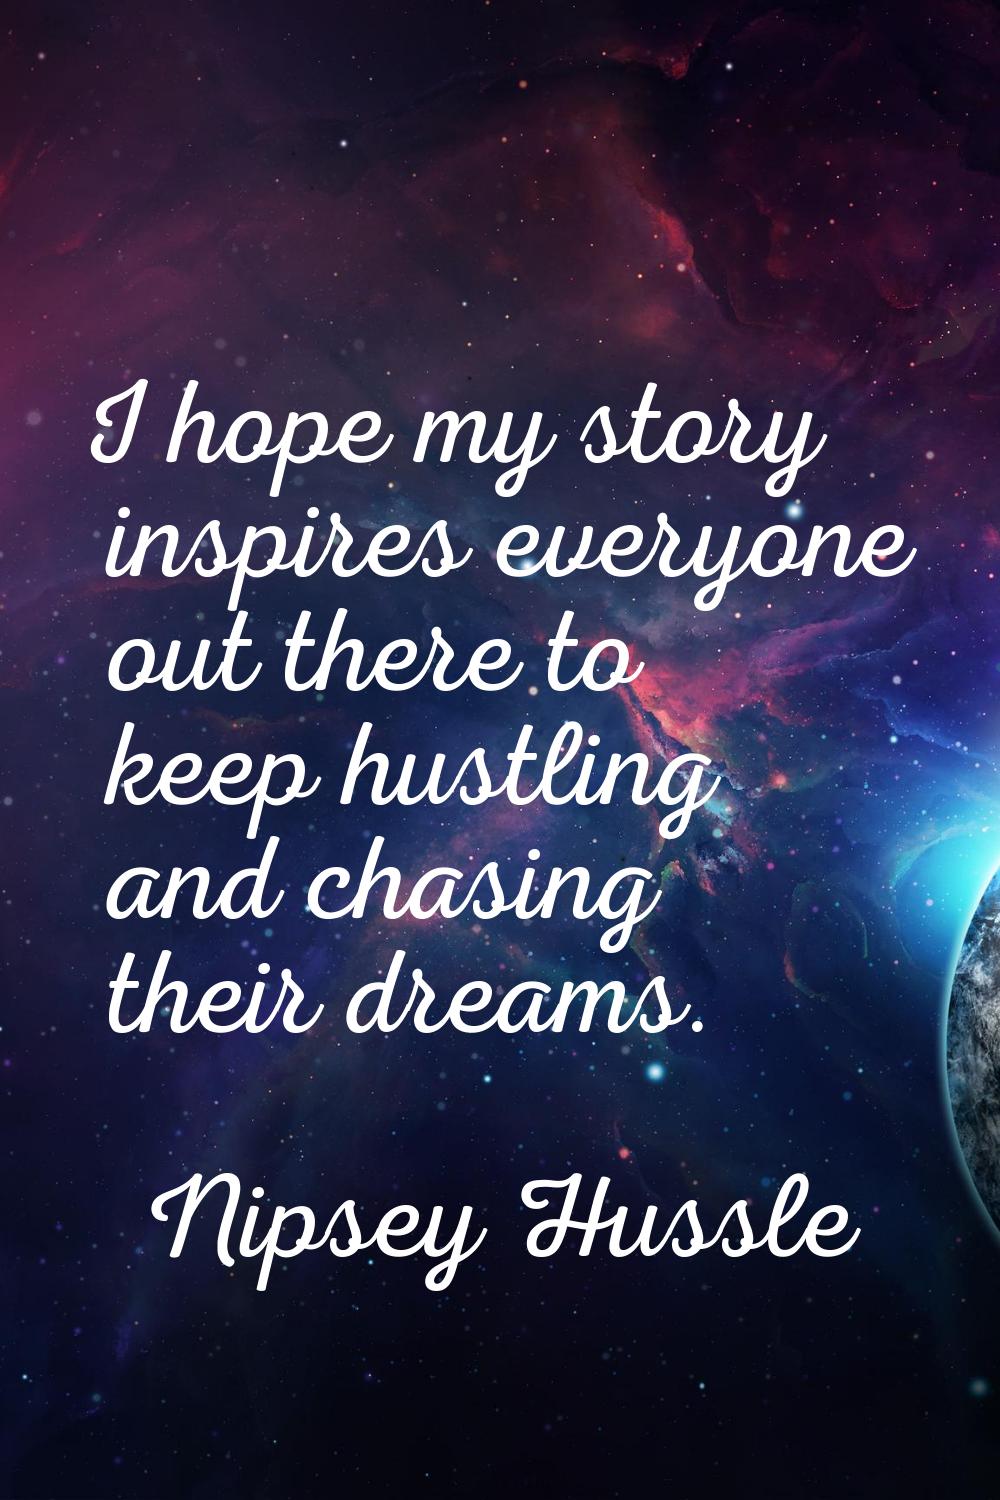 I hope my story inspires everyone out there to keep hustling and chasing their dreams.